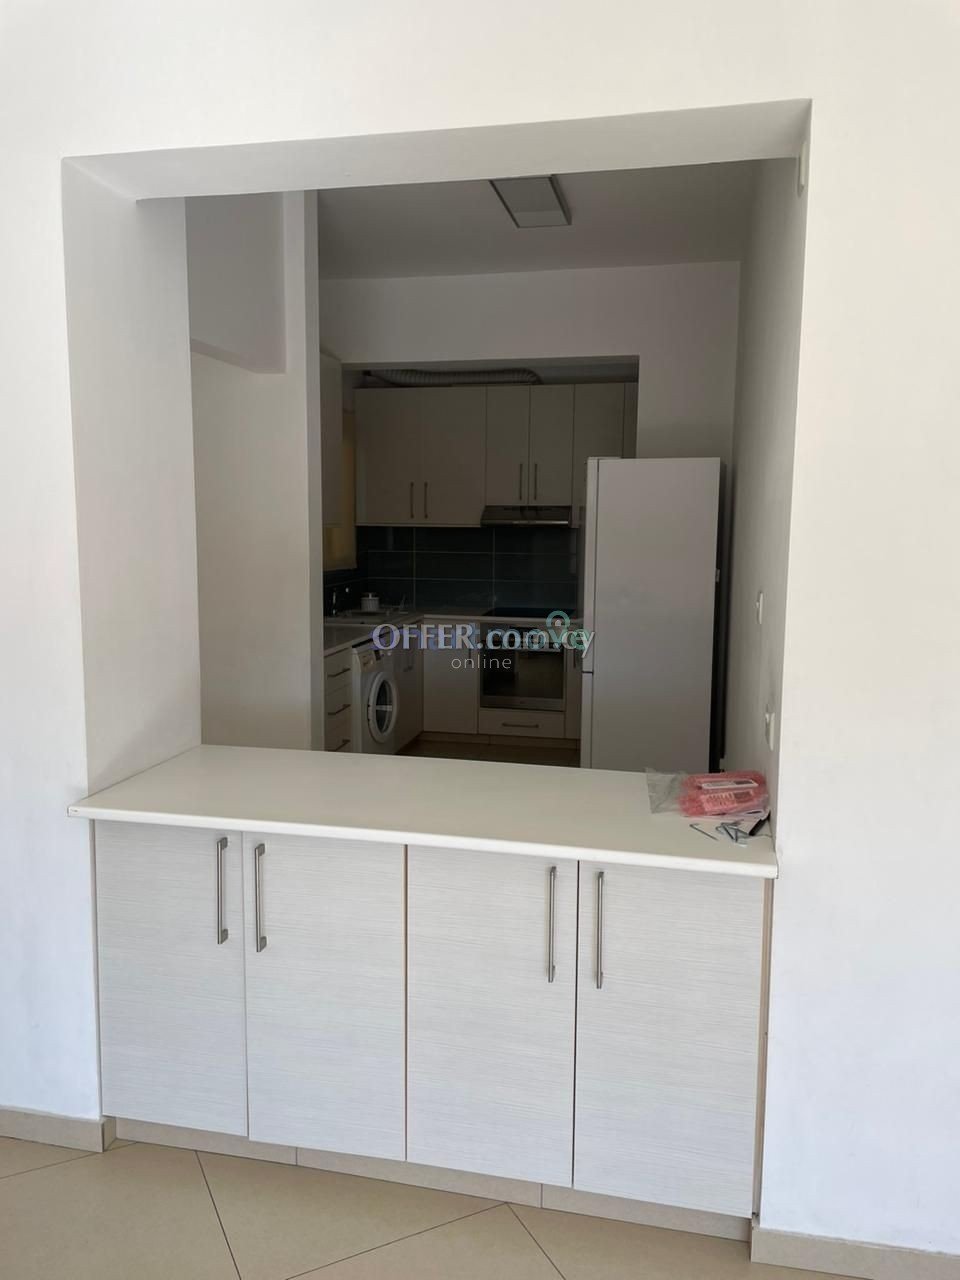 2 + 1 Bedroom Apartment For Rent Limassol - 9